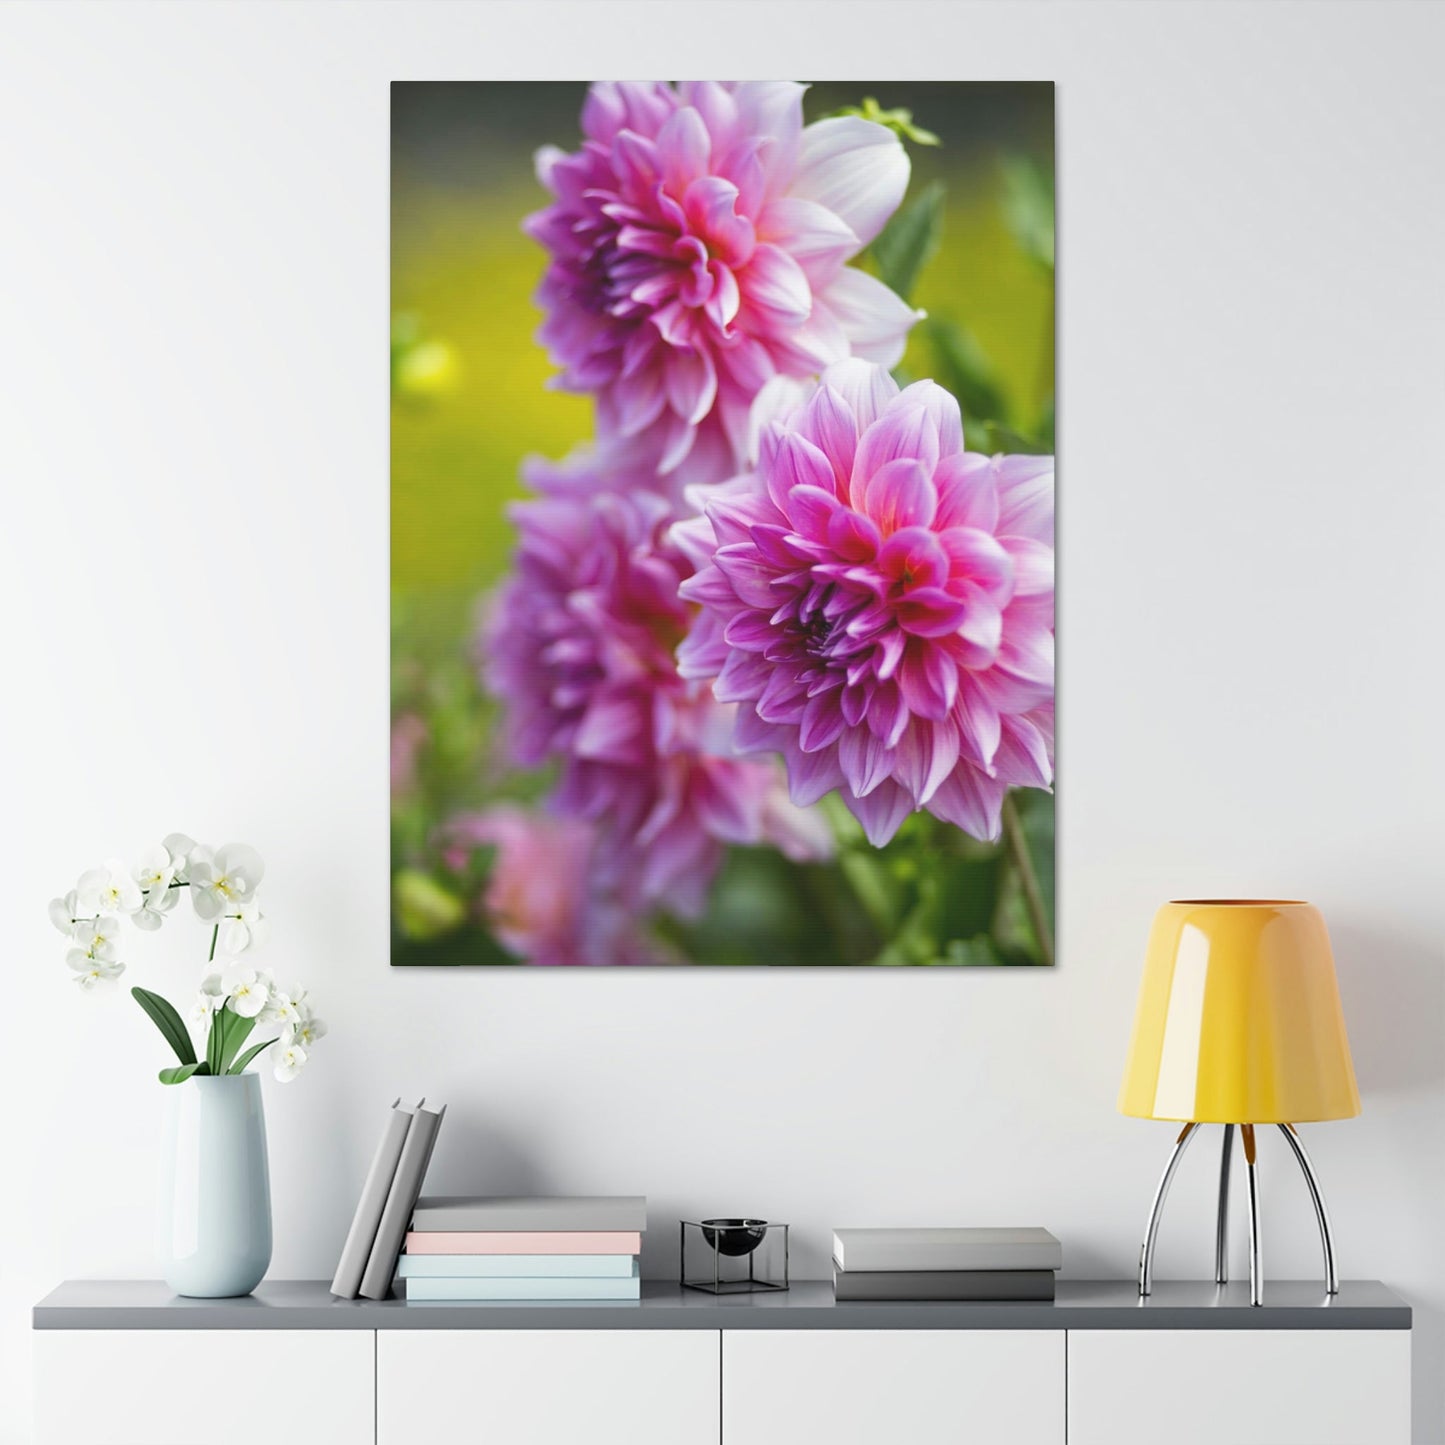 Elegant Blooms: A Framed Canvas of Beautiful Dahlia Blossoms